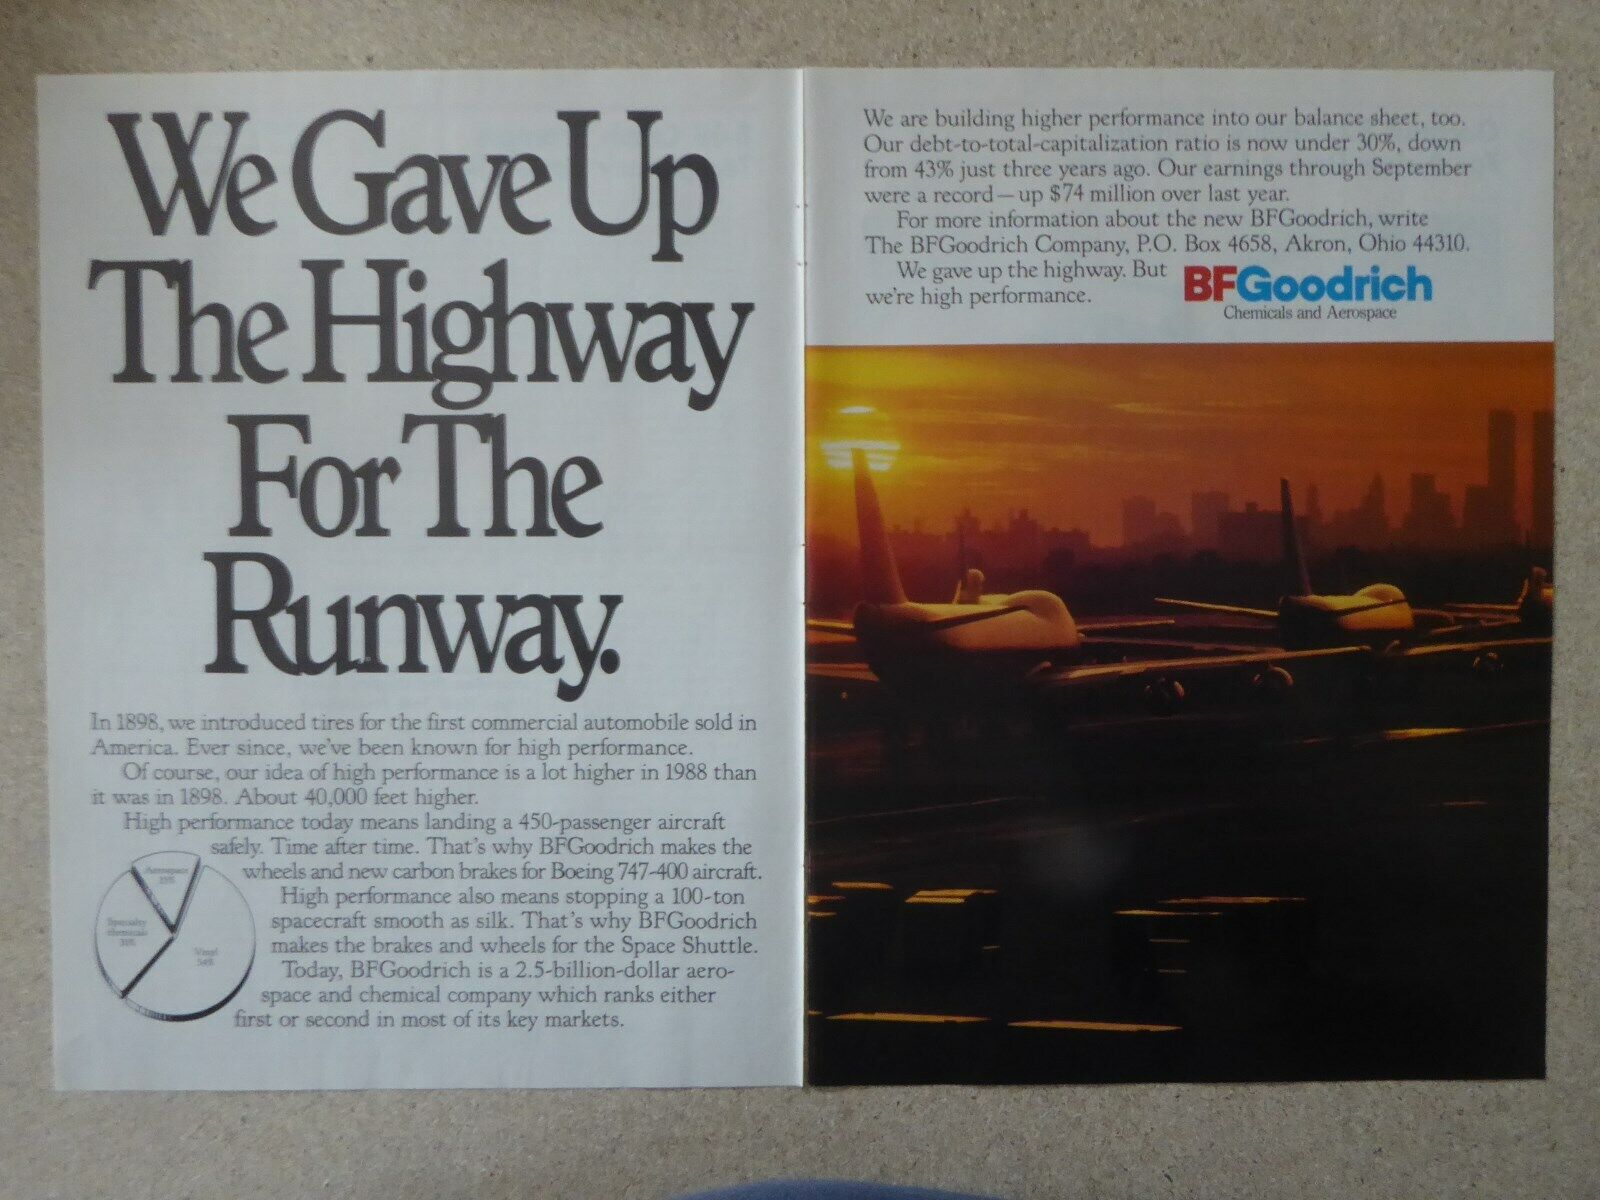 11/1988 PUB BF GOODRICH BOING 747-400 CARBON BRAKES NEW YORK TWIN TOWERS AD